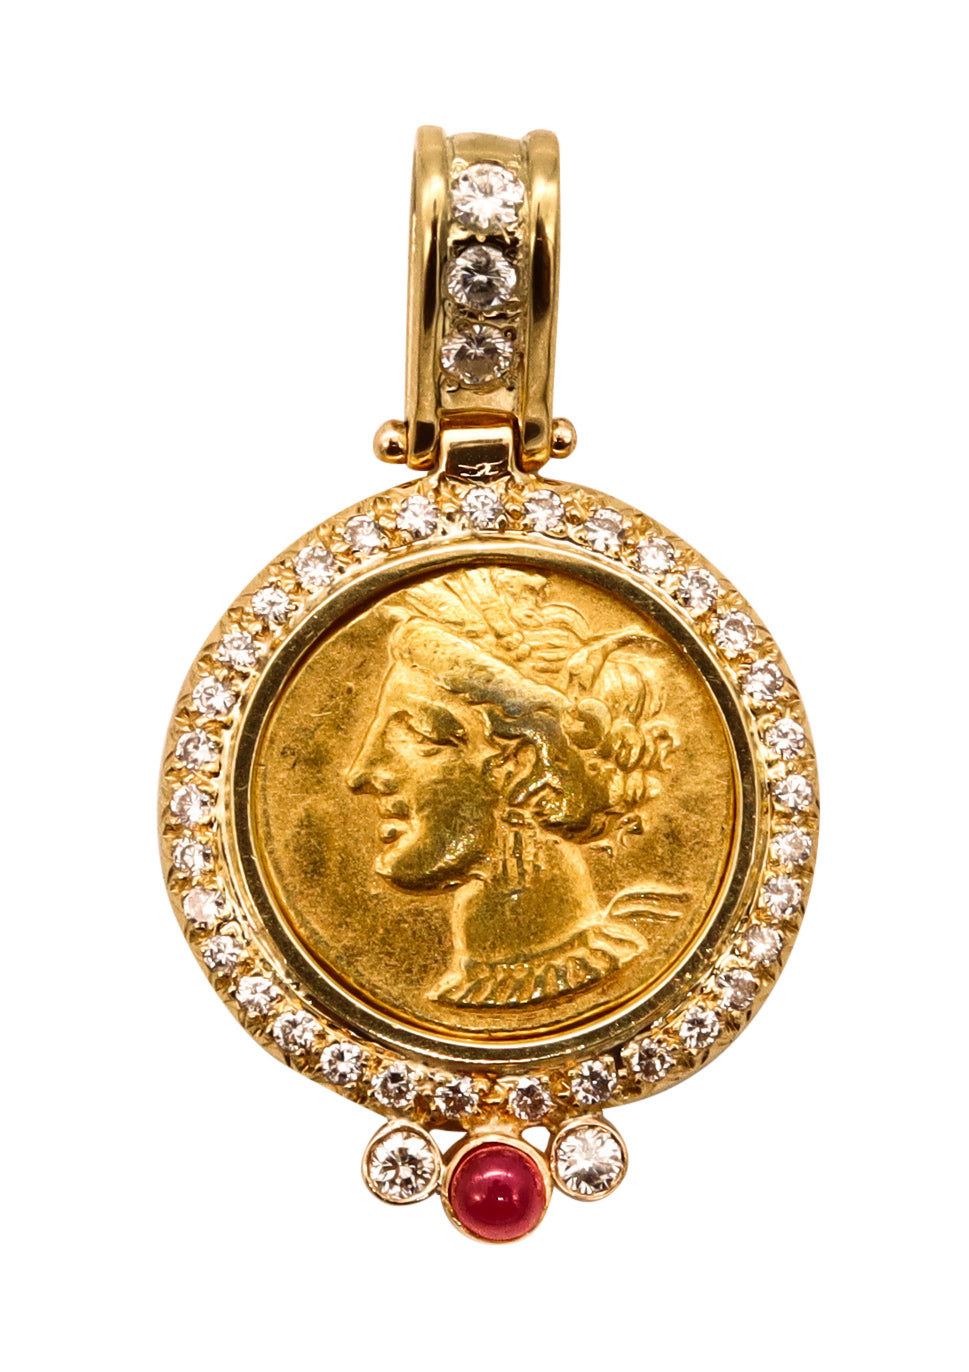 Ancient Carthage Punic Gold Electrum Stater Coin 320 BC Mounted In 18Kt Yellow Gold With 1.33 Cts In Diamonds & Ruby